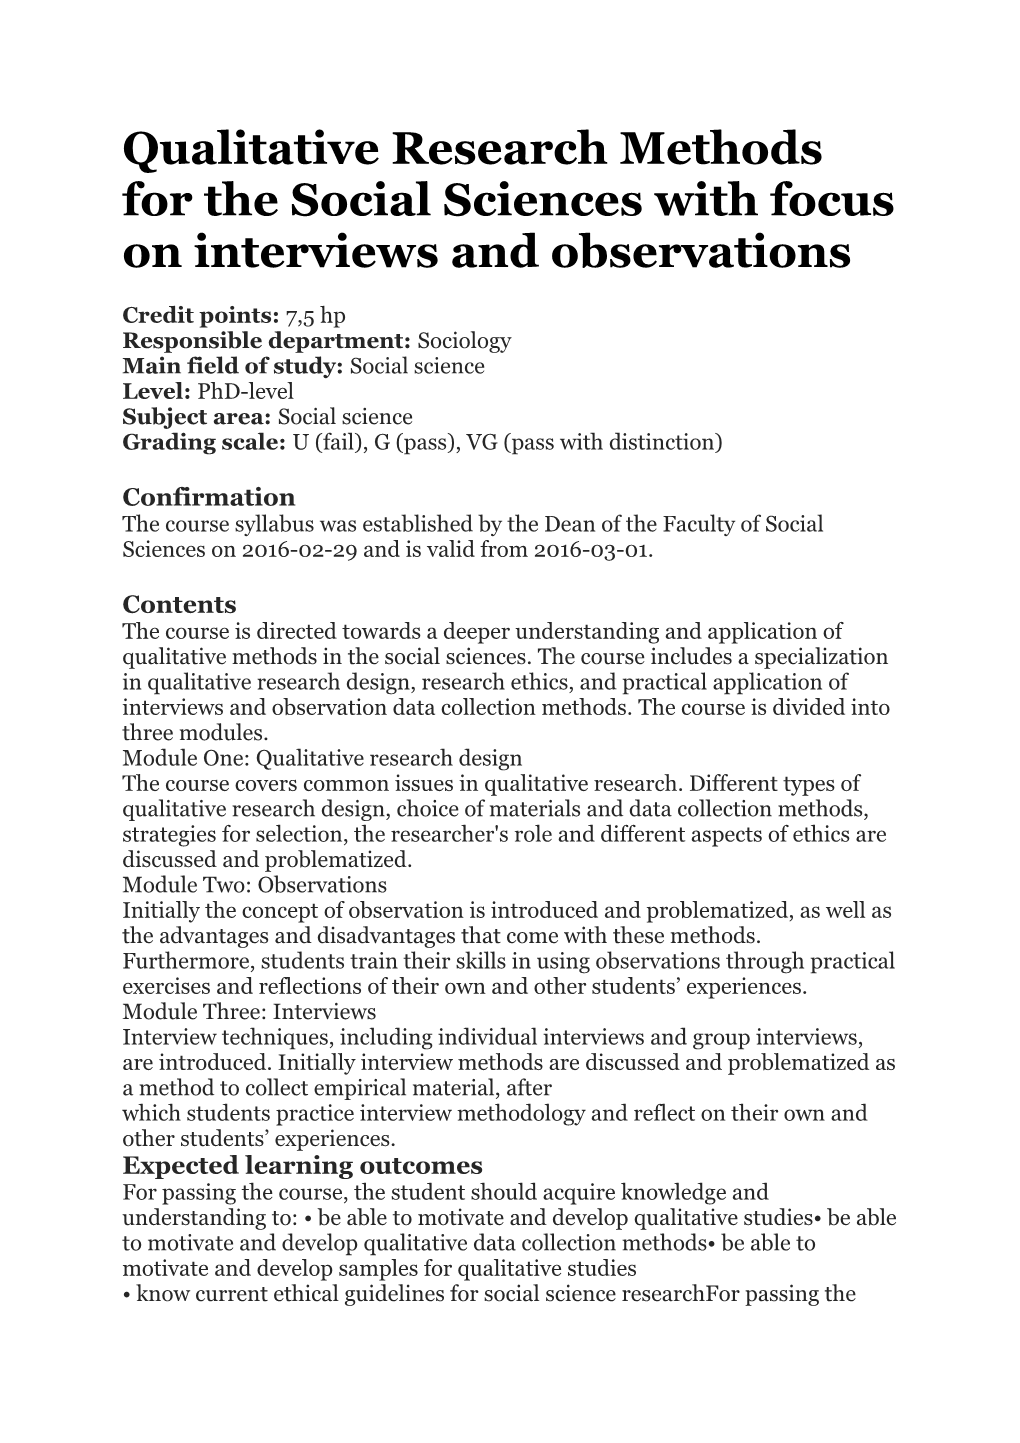 Qualitative Research Methods for the Social Sciences with Focus on Interviews and Observations